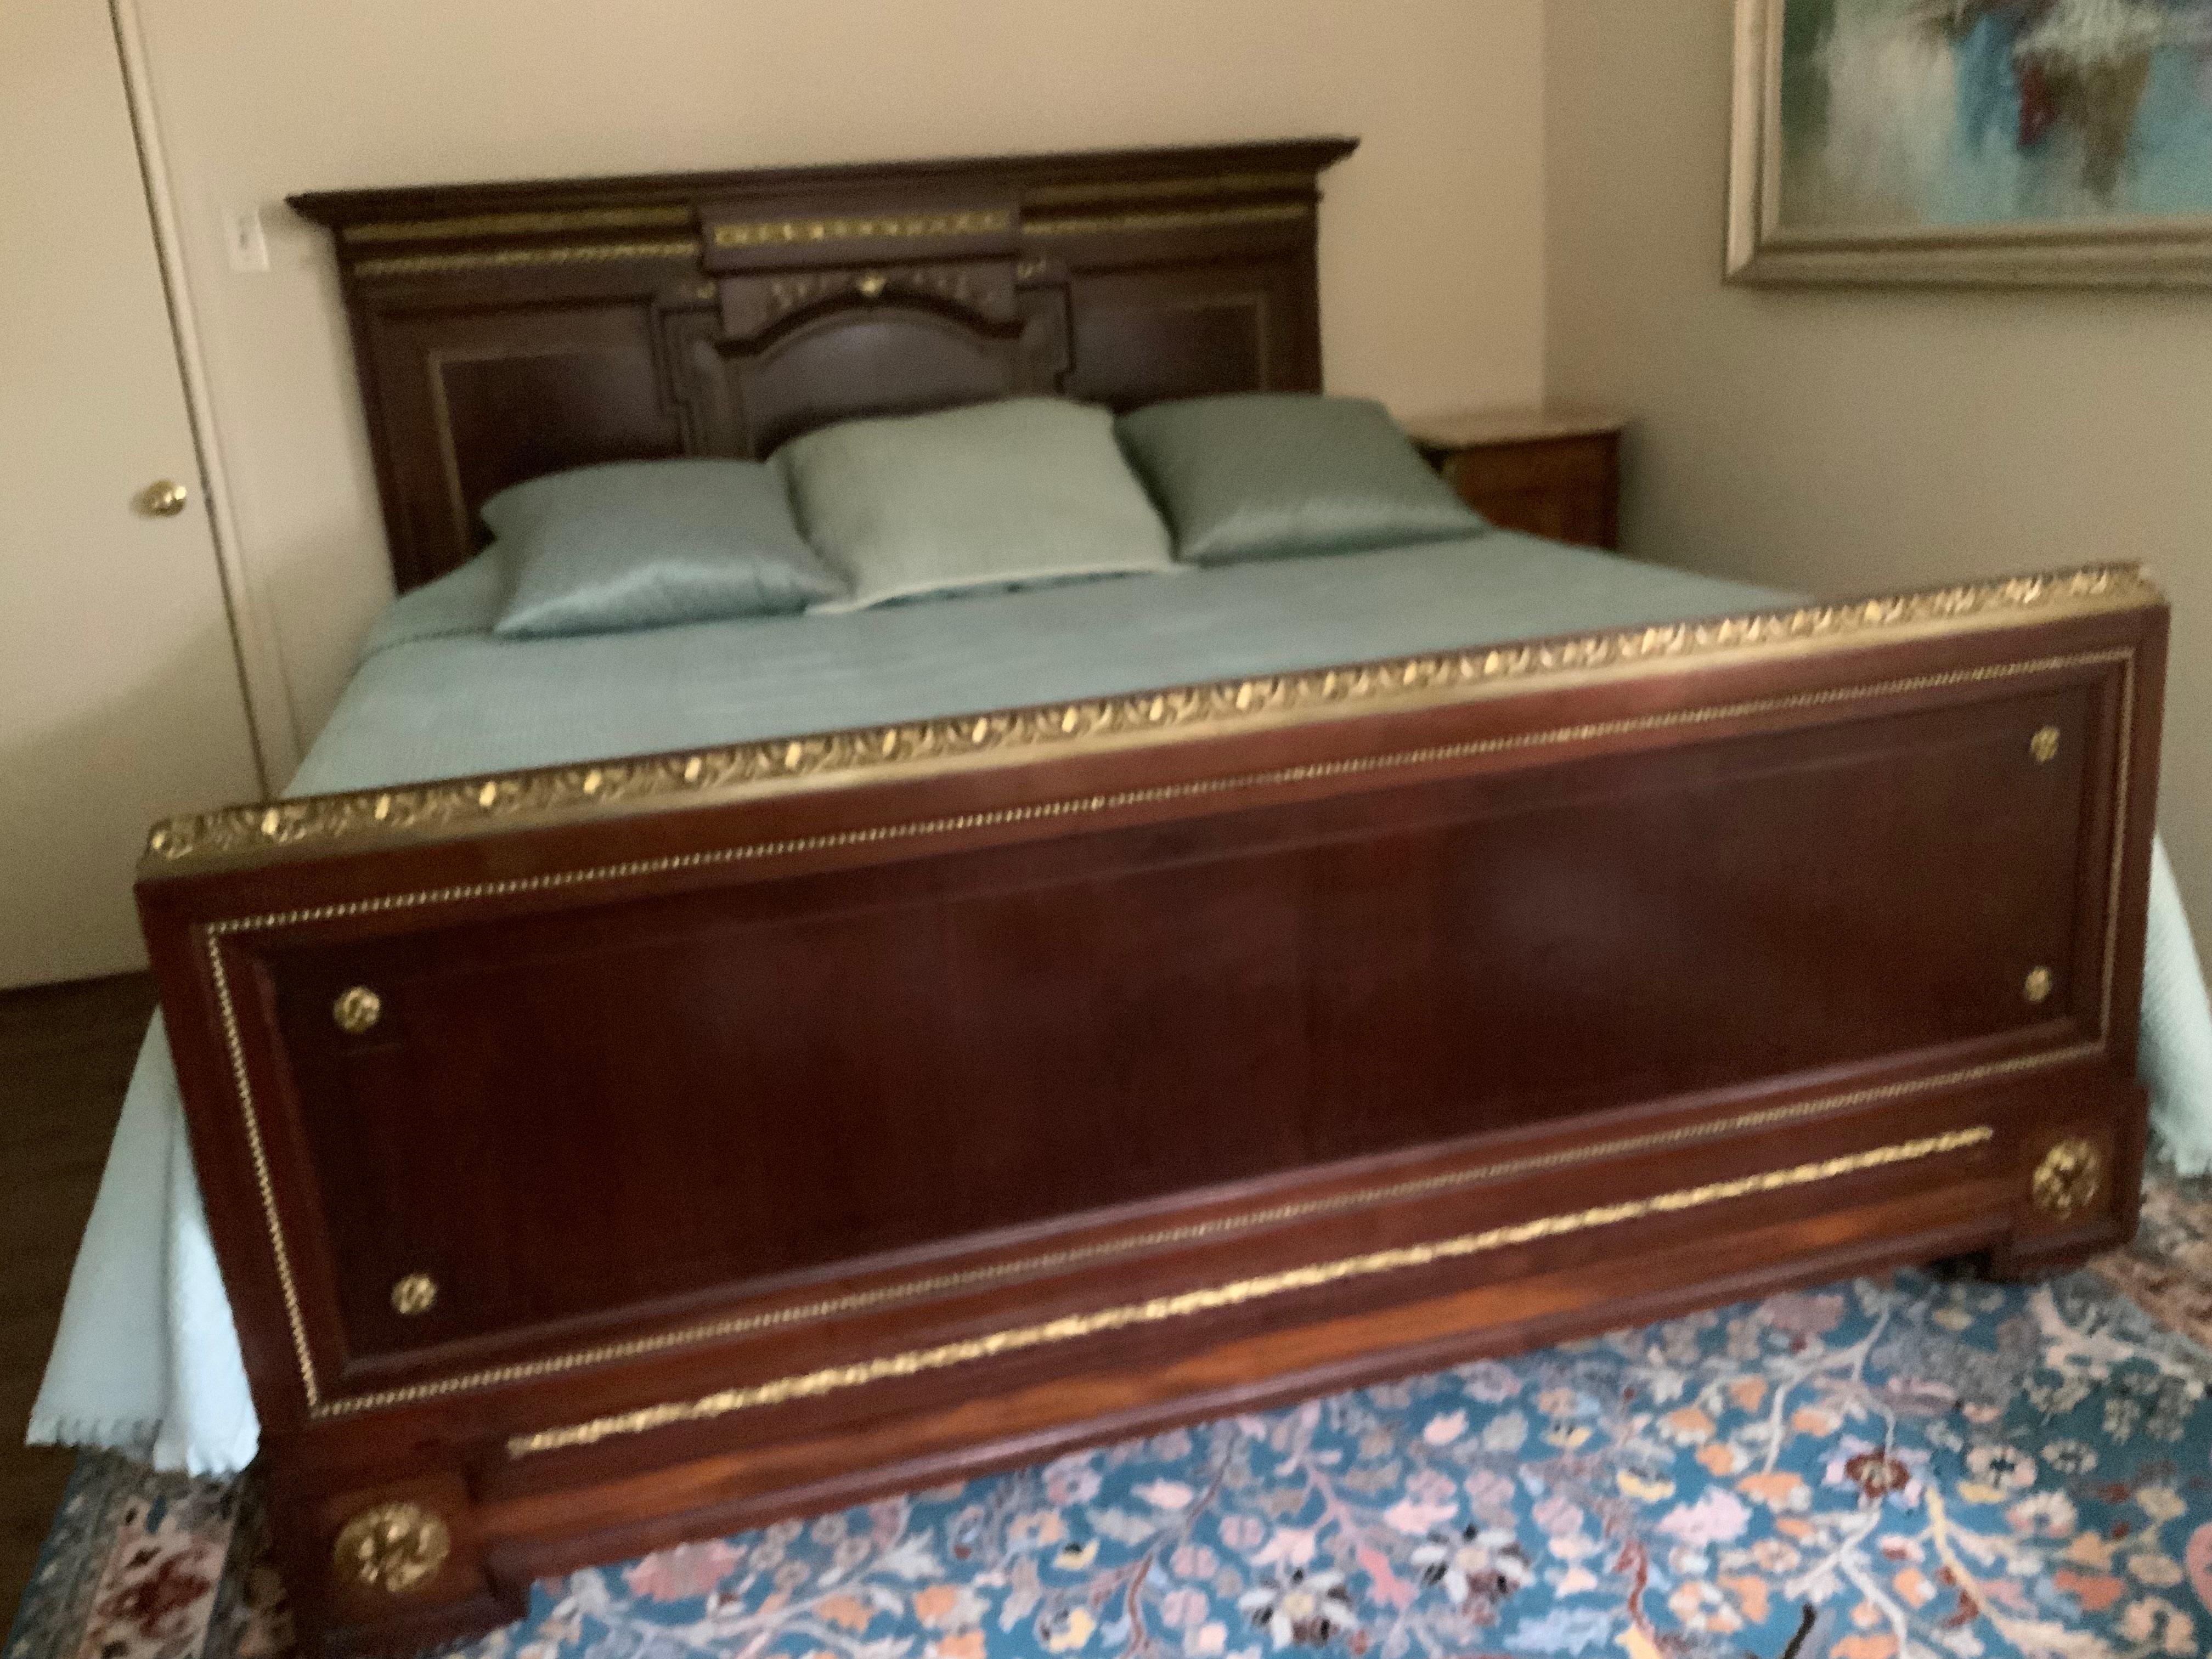 Large headboard and footboard are supported by 4” thick side rails.
The mahogany is fine and in great condition. The size is a bit smaller
Than king in the width but the side rails support a king as pictured 
In the photograph. It has fine detail